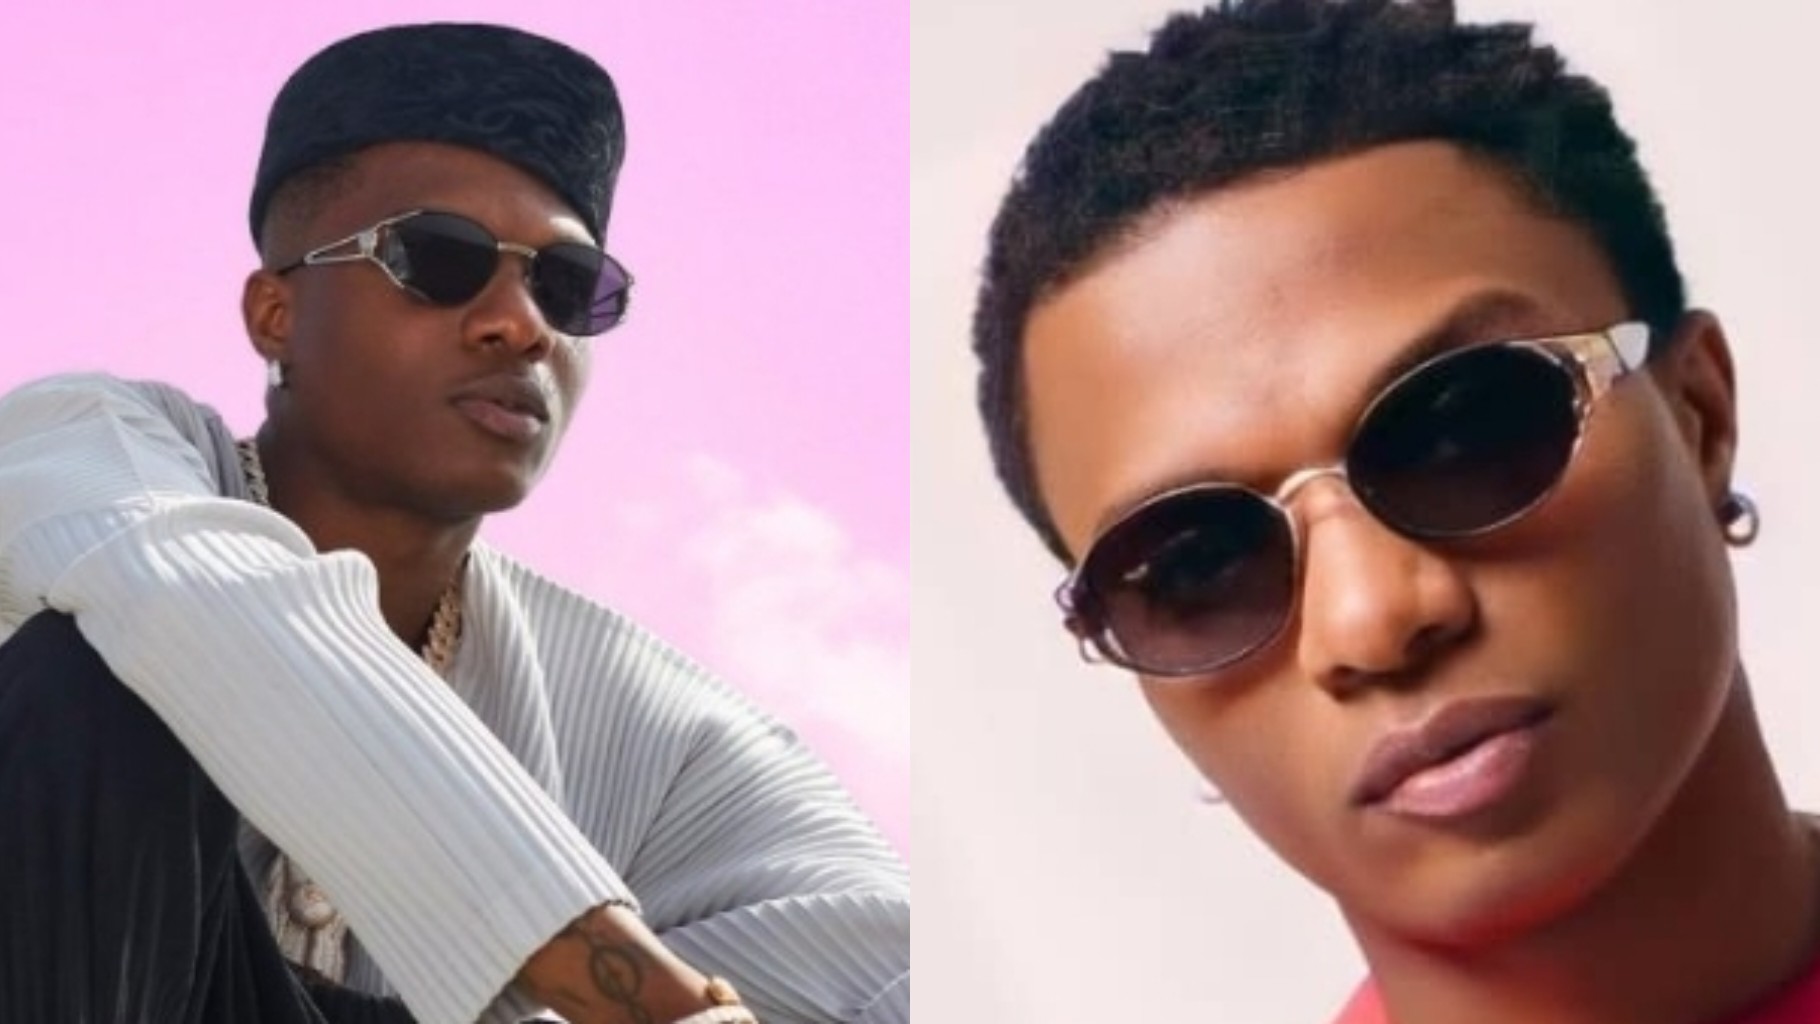 Christmas: Singer Wizkid announces N100M giveaway for children in honor of late mother (Photos)